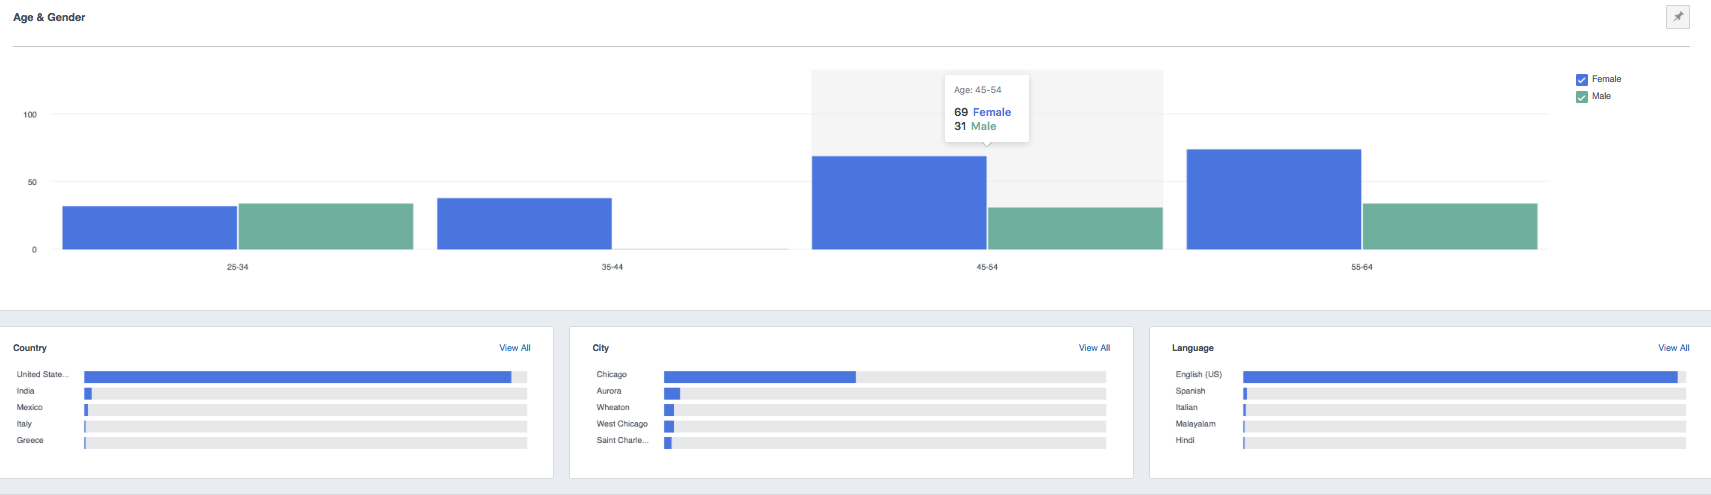 Business Demographics Data on the Facebook Ads Manager